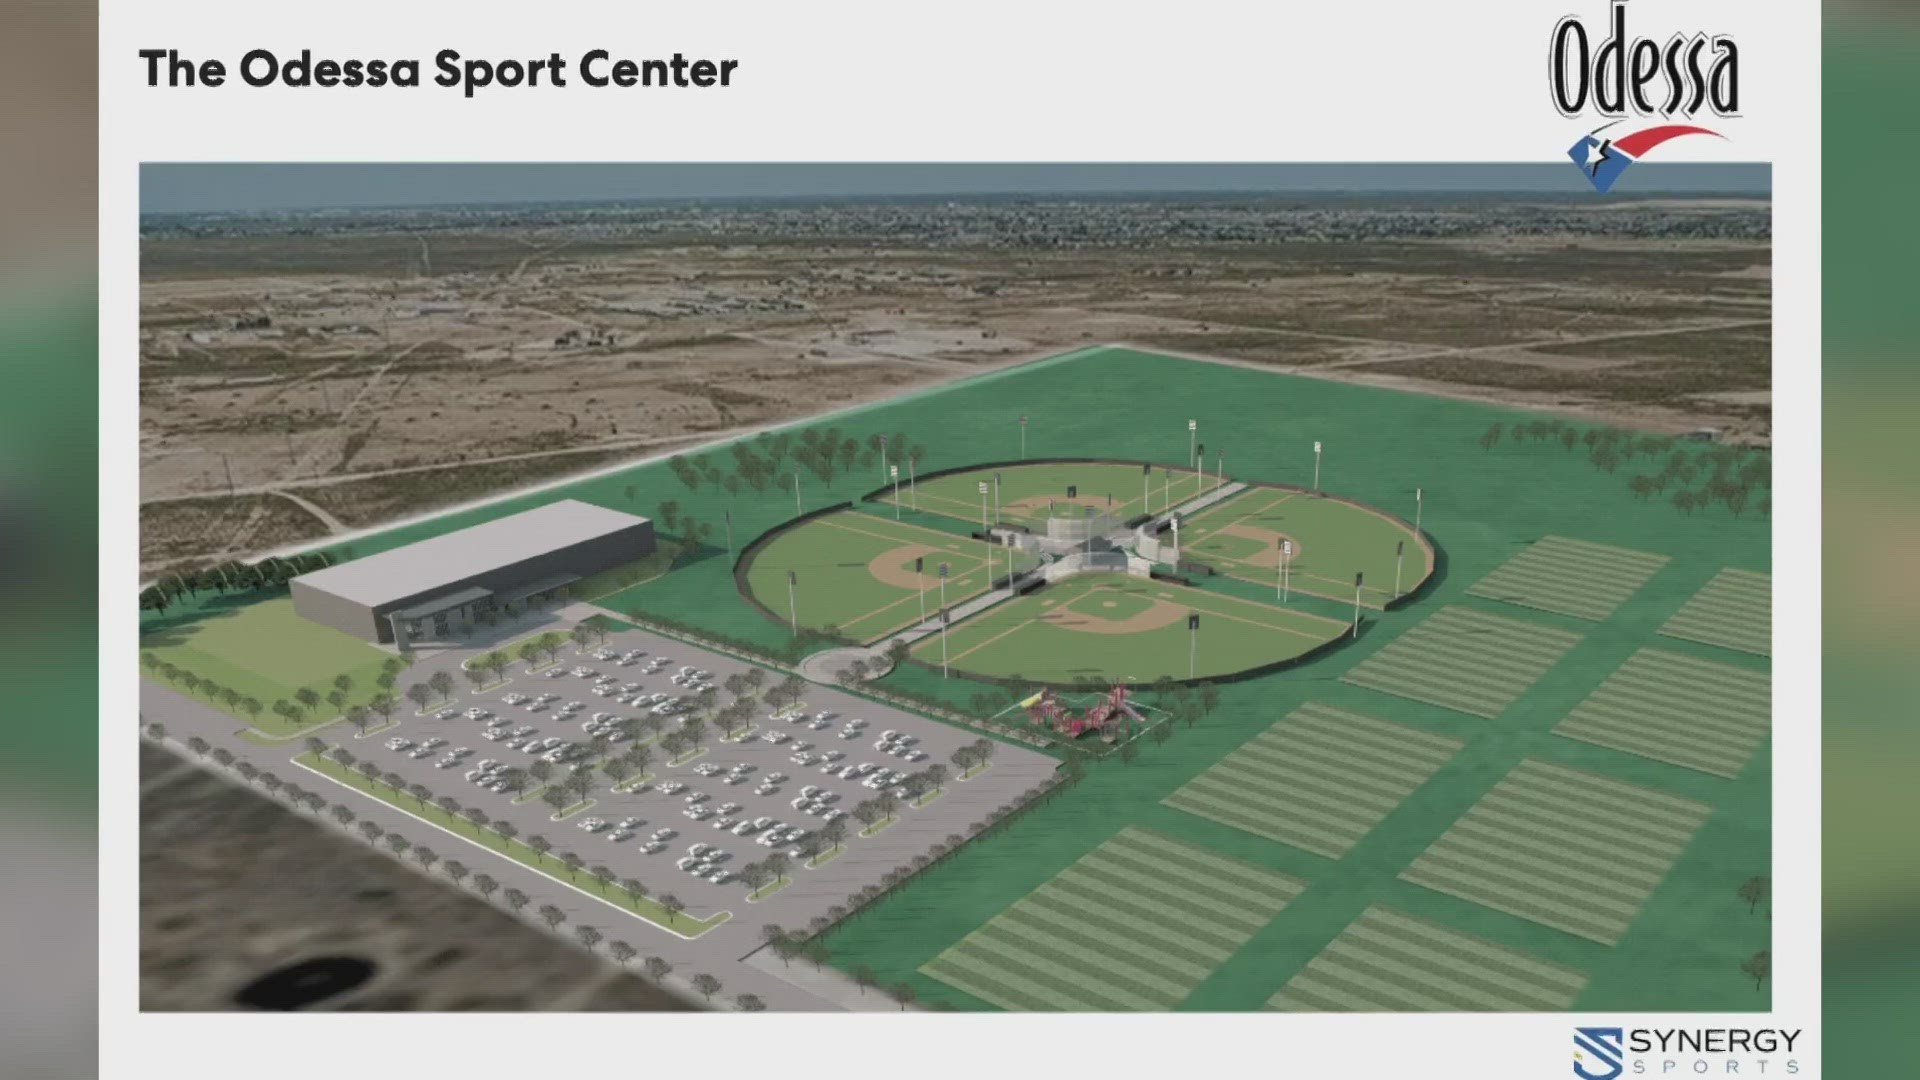 The complex will be located on 100 acres north of Faudree Road, in northeast Odessa. The multi-use facility will include both indoor and outdoor sports activities.